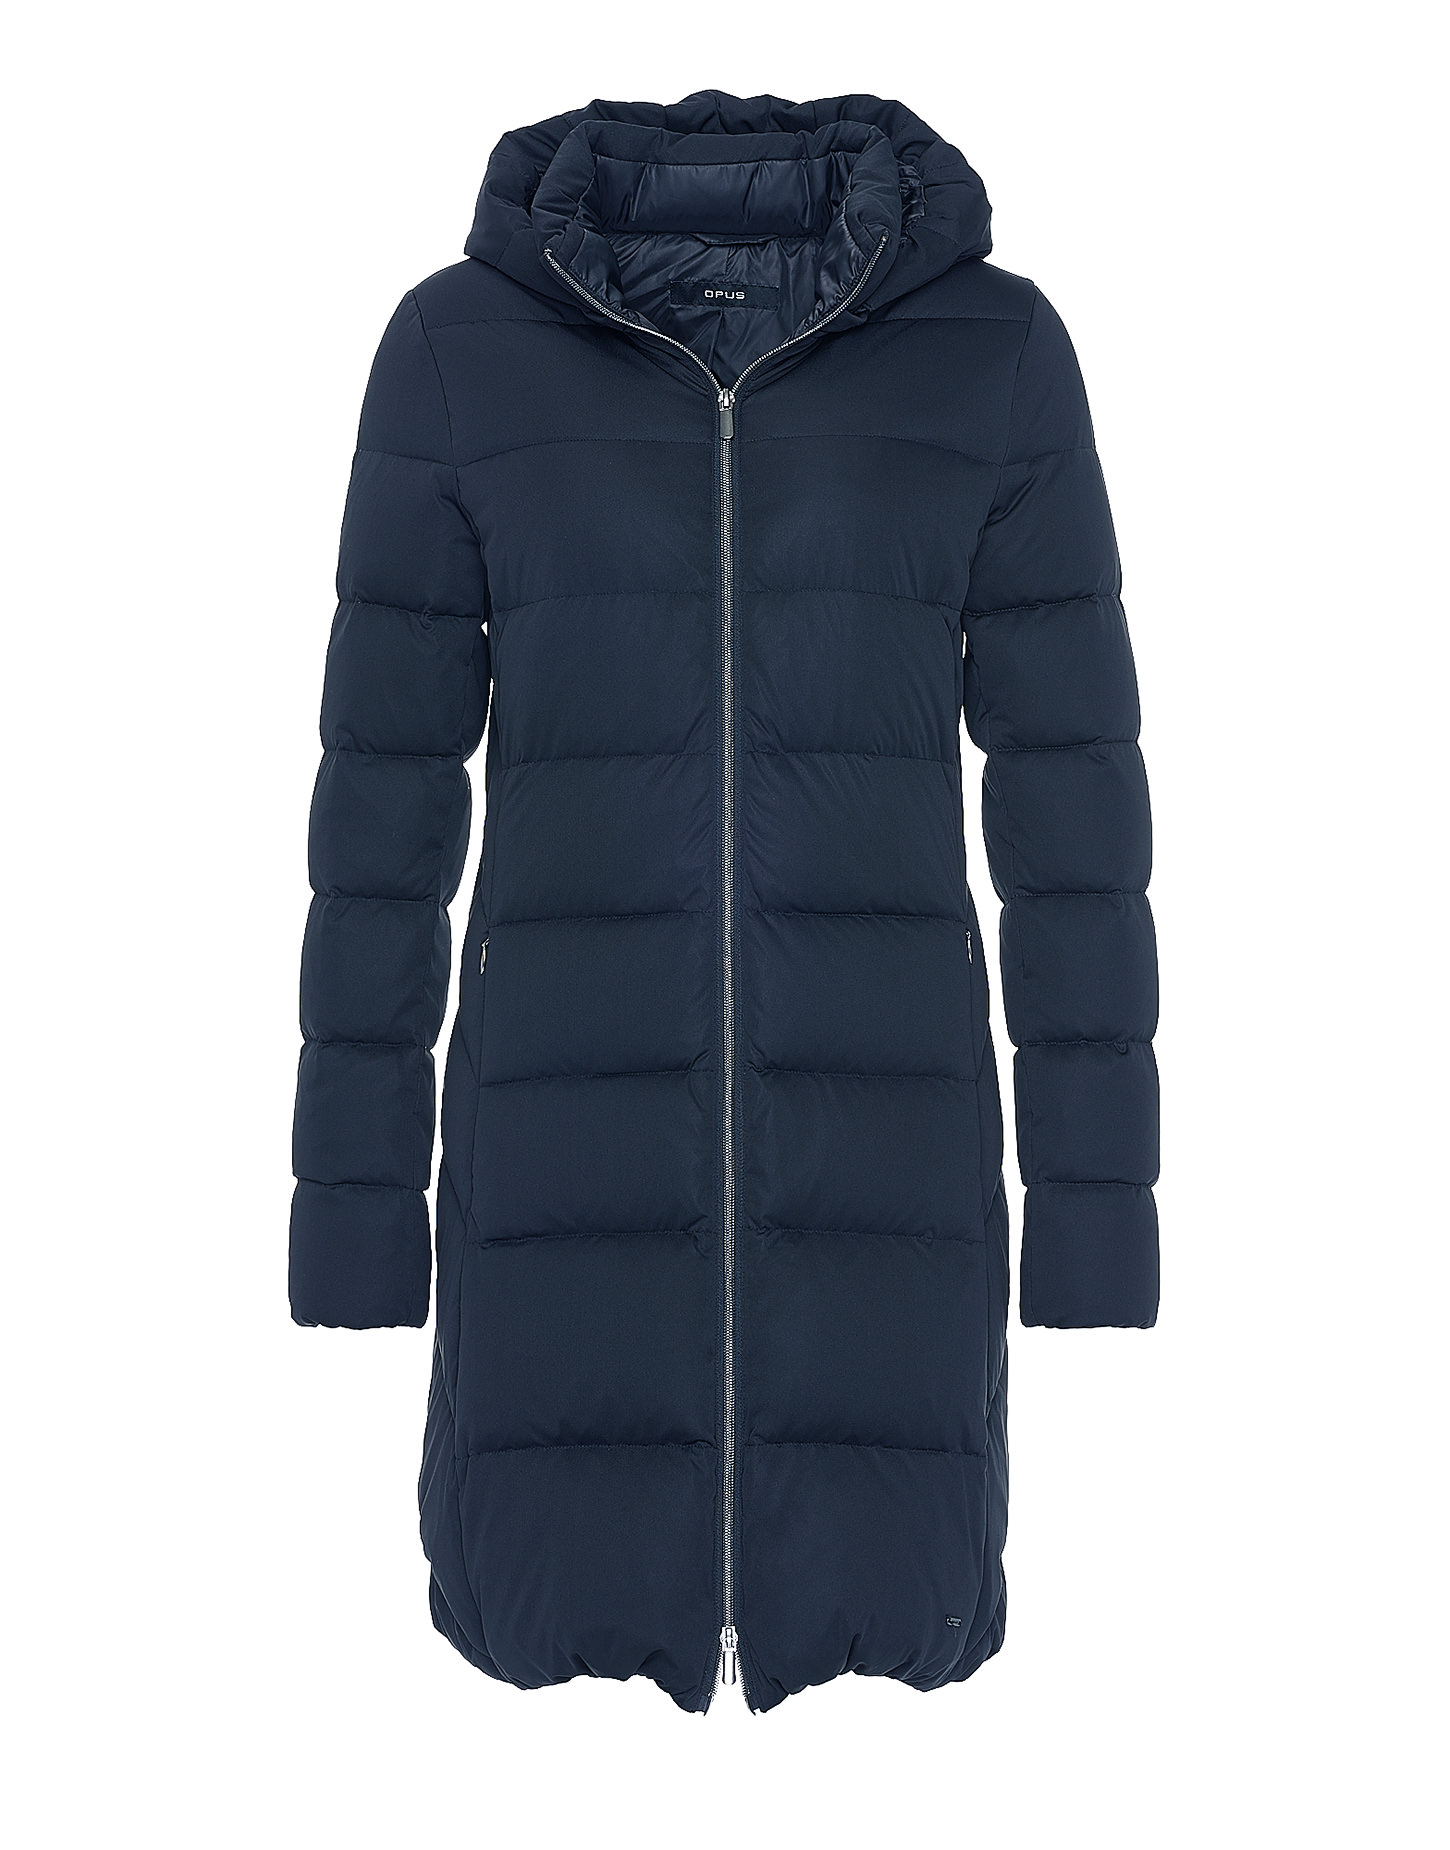 Down coat Heleni blue by OPUS | shop your favourites online